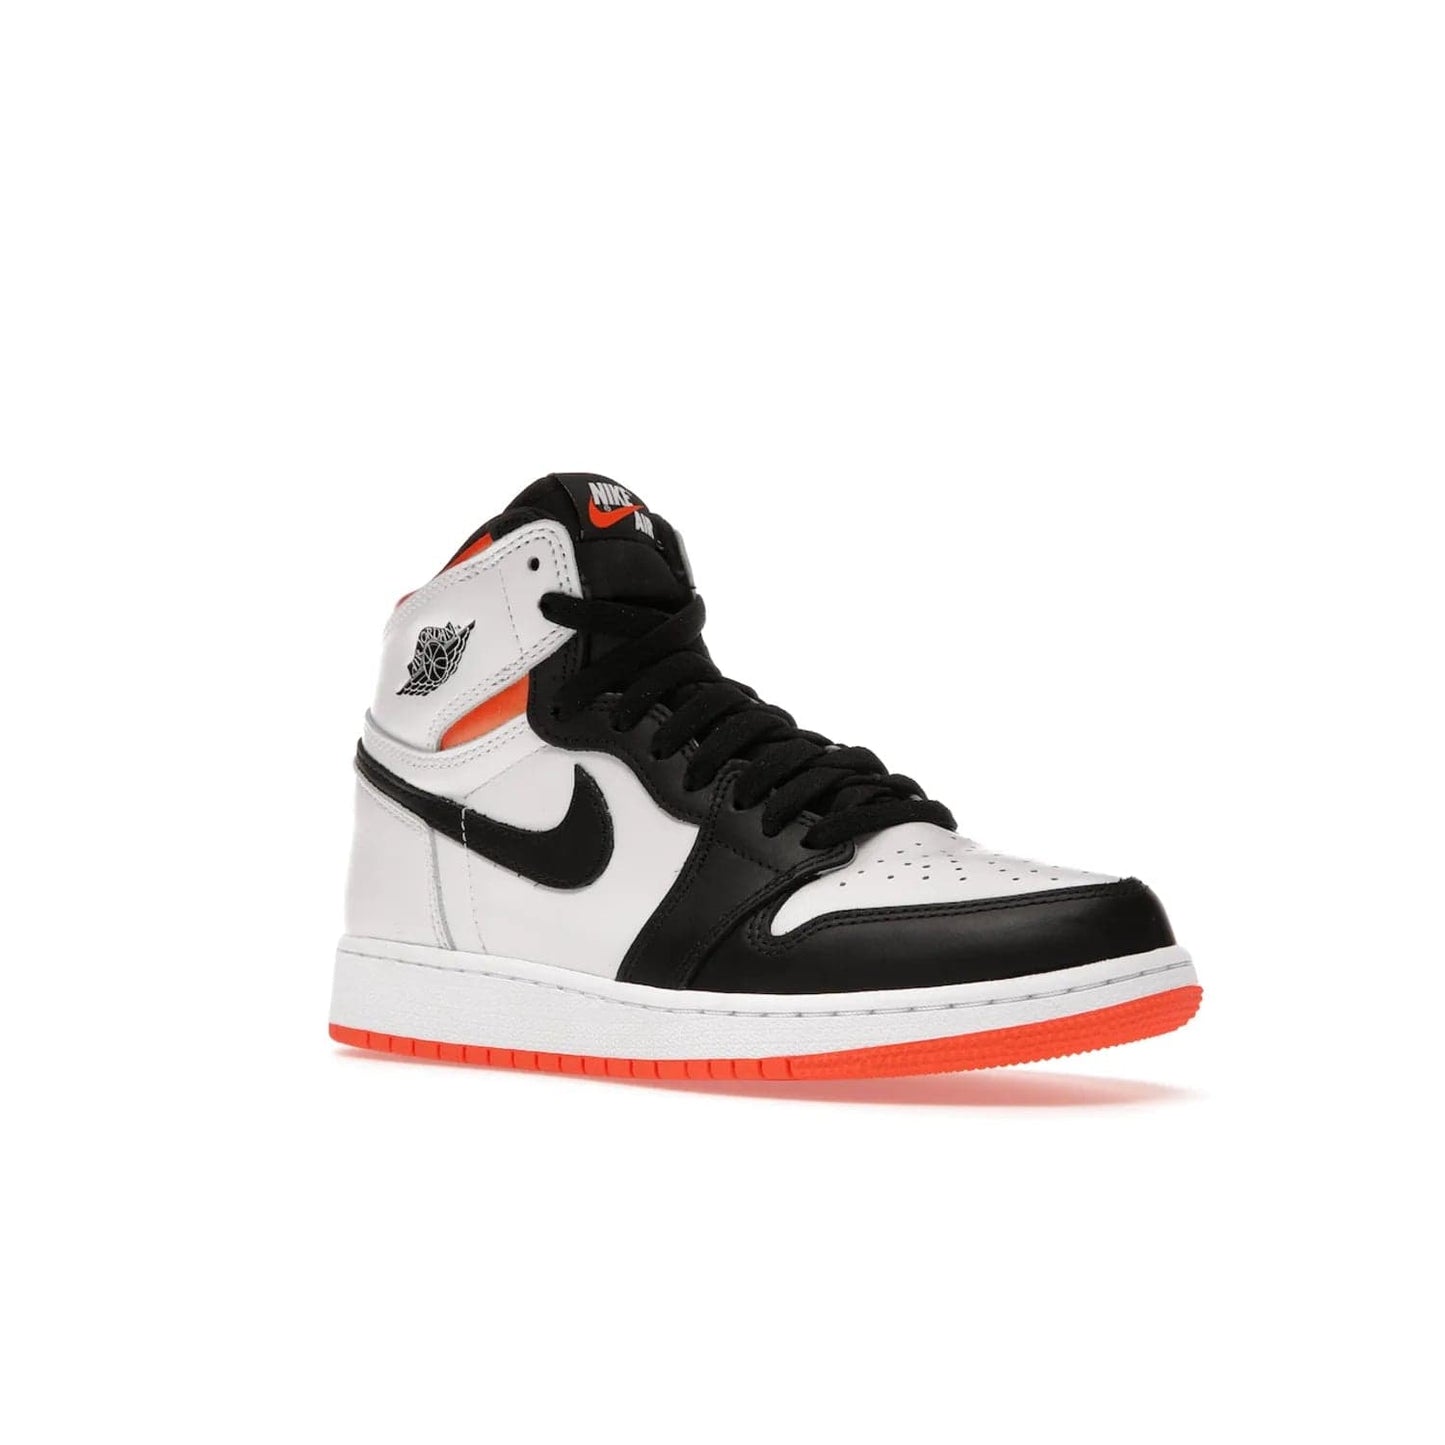 Jordan 1 High OG Electro Orange (GS) - Image 5 - Only at www.BallersClubKickz.com - The Air Jordan 1 High OG Electro Orange GS is the ideal shoe for kids on the go. Featuring white leather uppers, black overlays, and bright orange accents, it's sure to become a favorite. A great mix of classic style and vibrant colors, the shoe delivers air cushioning for comfort and hard orange rubber for grip. Release on July 17th, 2021. Get them a pair today.